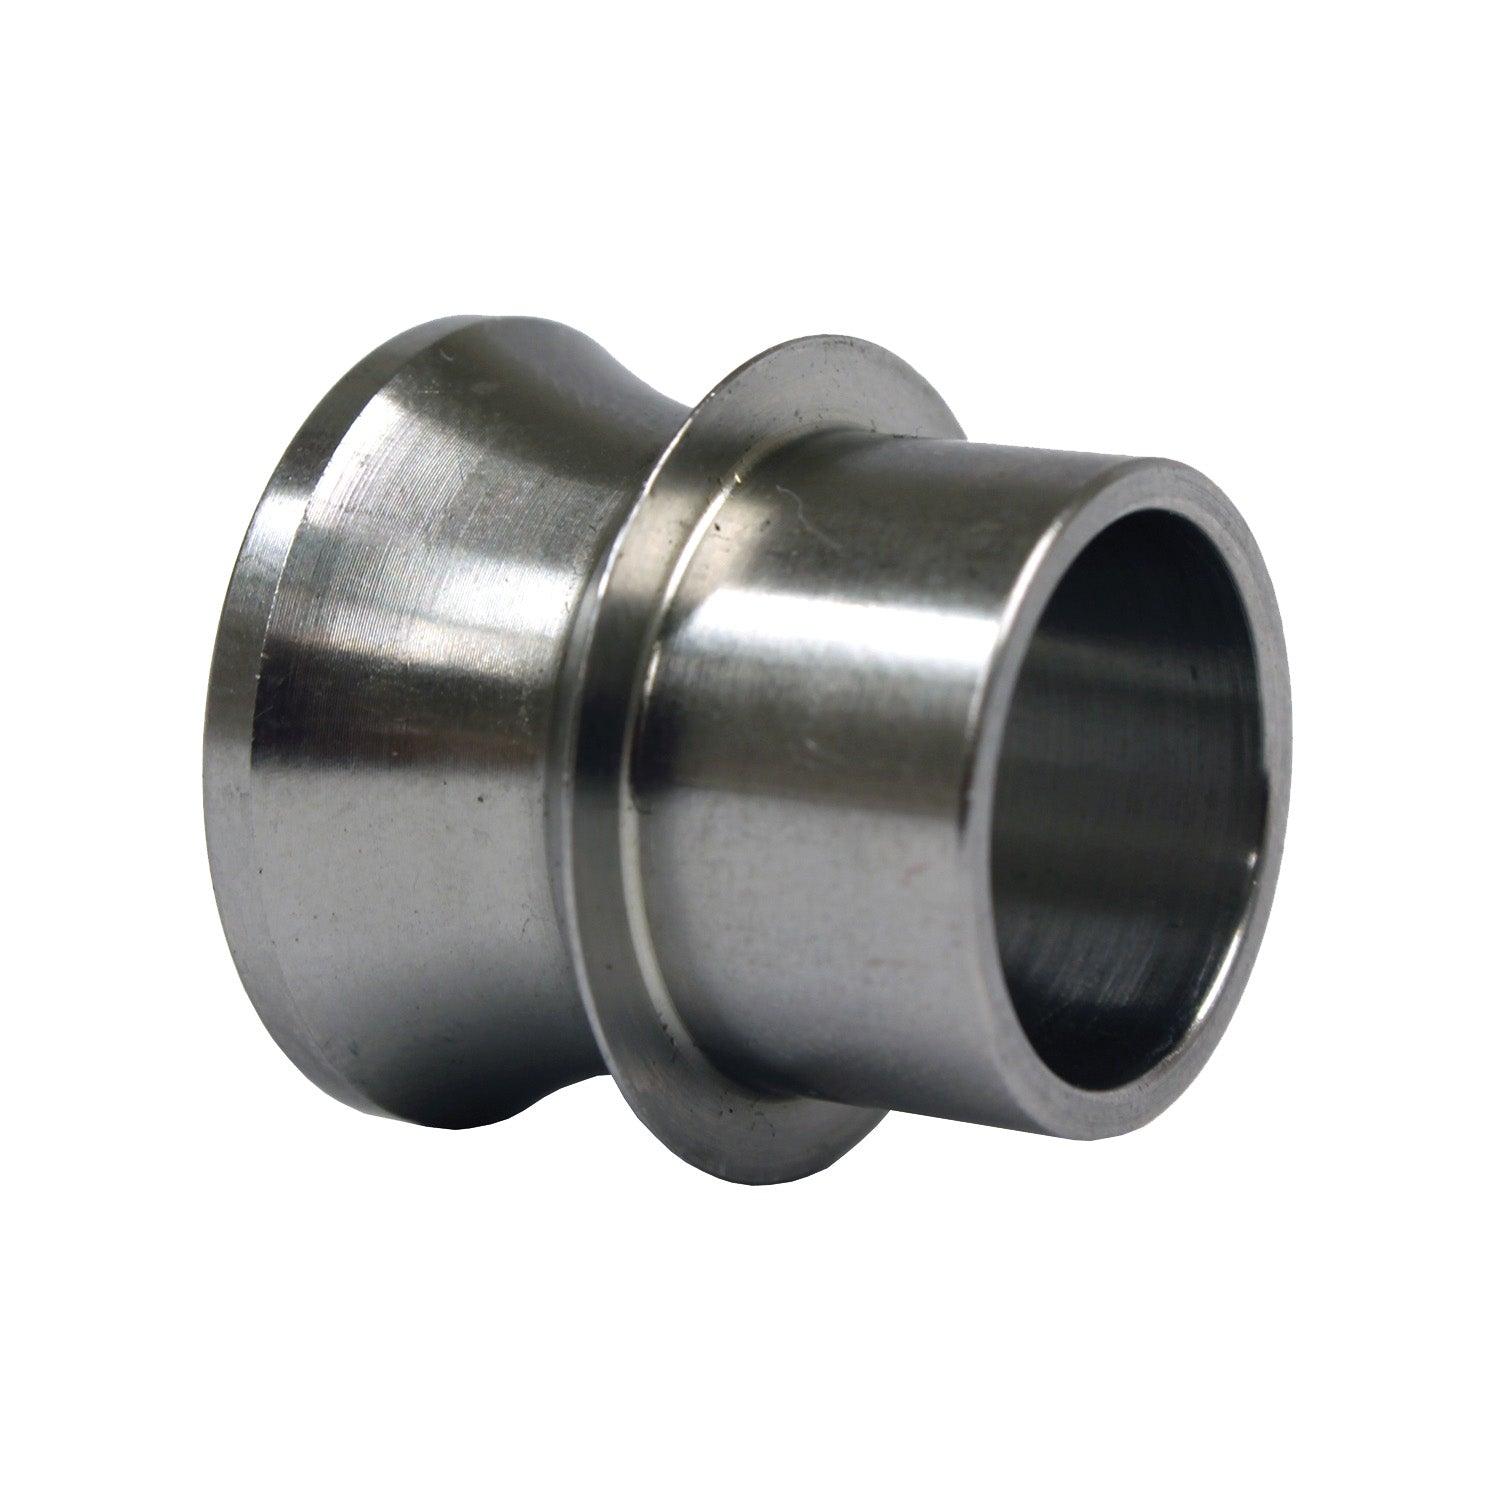 QA1 SN20-1014-H High Misalignment Spacer, 1.25 inch Od Ss, .625 inch X 3 inch Total Width